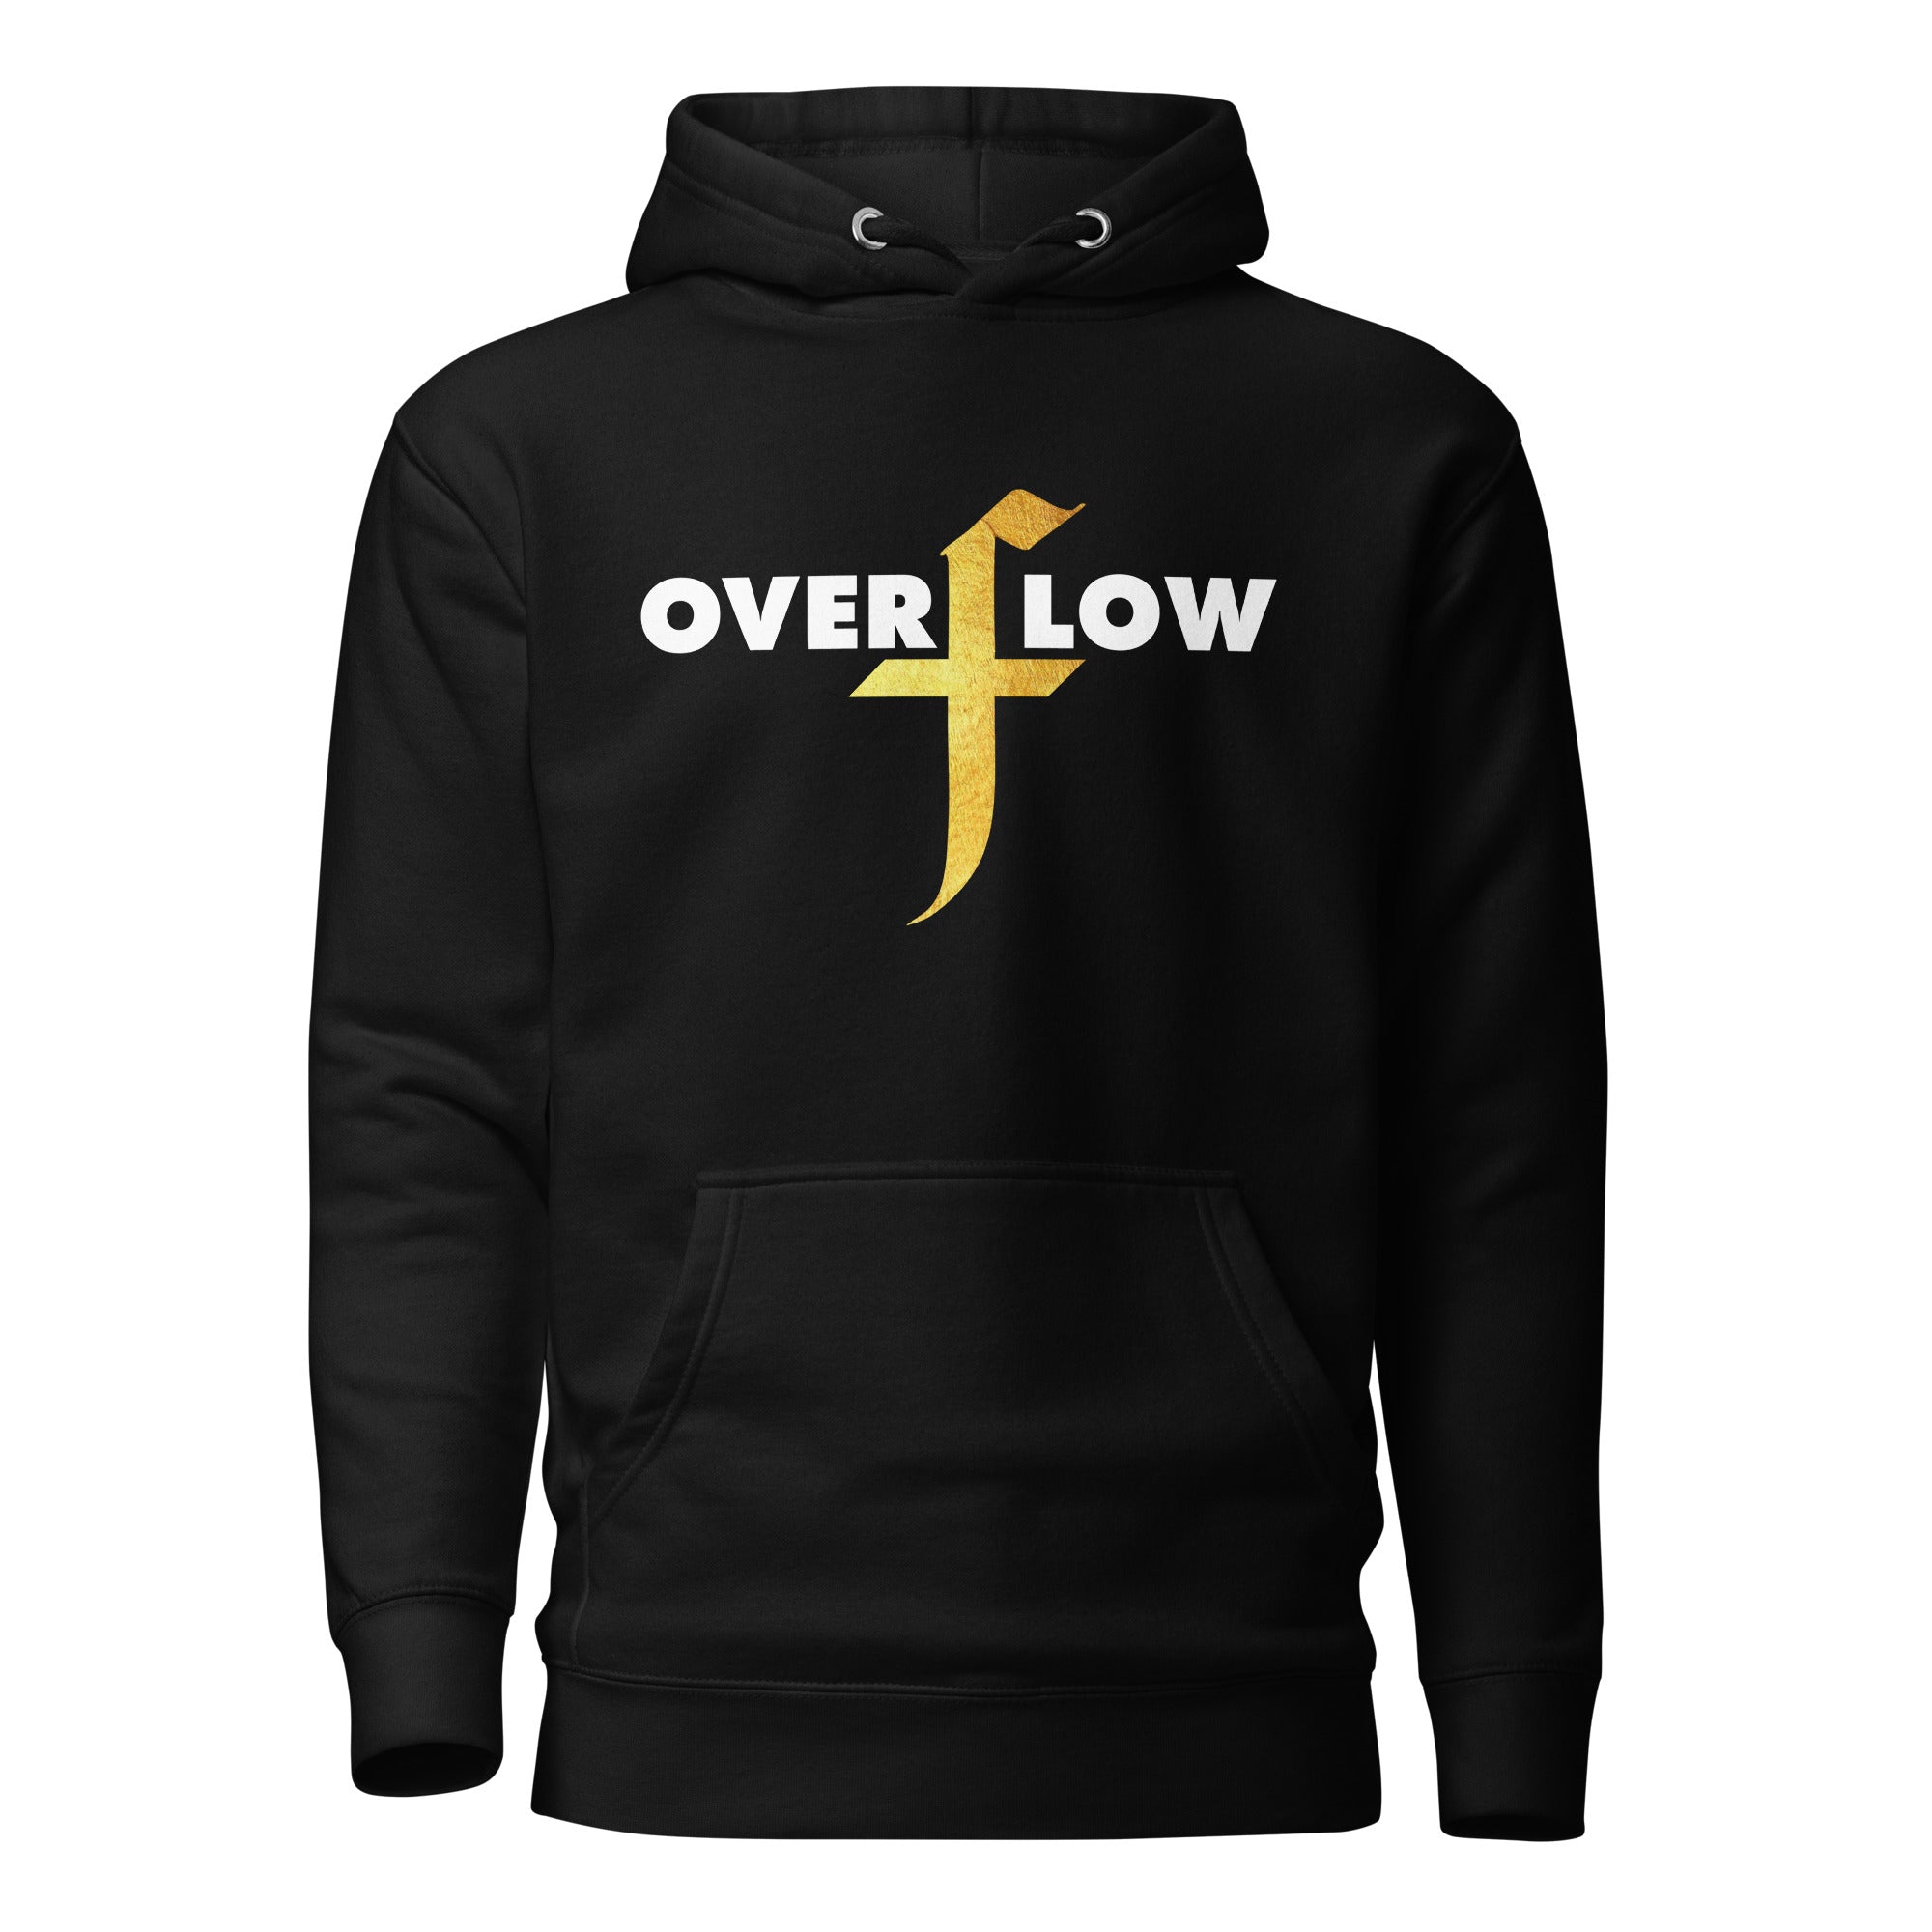 Overflow Inspire, Used By God, Used By God Clothing, Christian Apparel, Christian Hoodies, Christian Clothing, Christian Shirts, God Shirts, Christian Sweatshirts, God Clothing, Jesus Hoodie, christian clothing t shirts, Jesus Clothes, t-shirts about jesus, hoodies near me, Christian Tshirts, God Is Dope, Art Of Homage, Red Letter Clothing, Elevated Faith, Active Faith Sports, Beacon Threads, God The Father Apparel